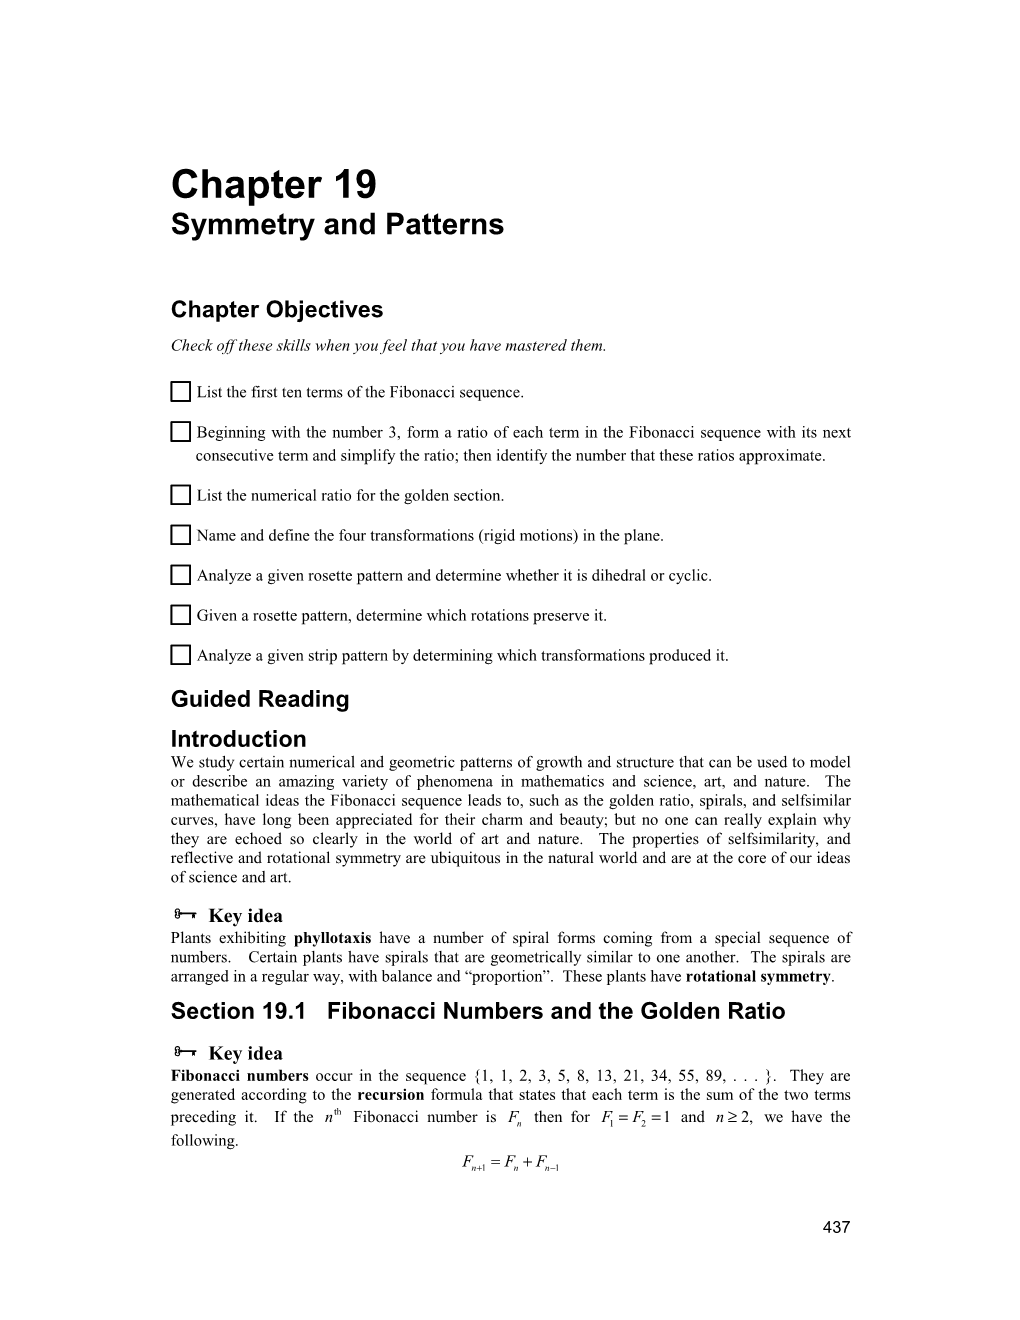 Chapter 19 Symmetry and Patterns